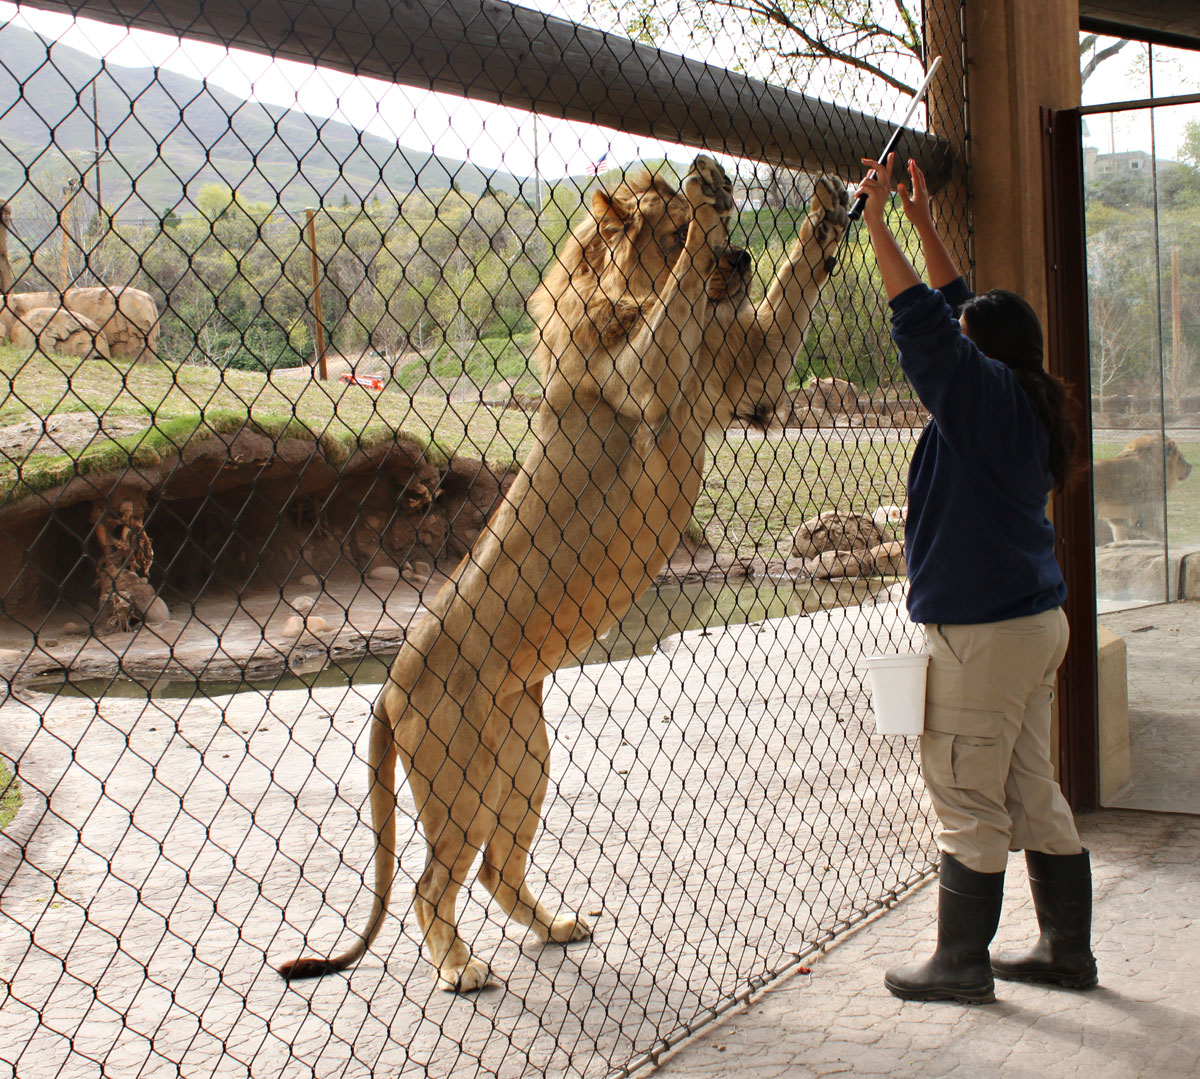 Trainer working with a lion at Hogle Zoo